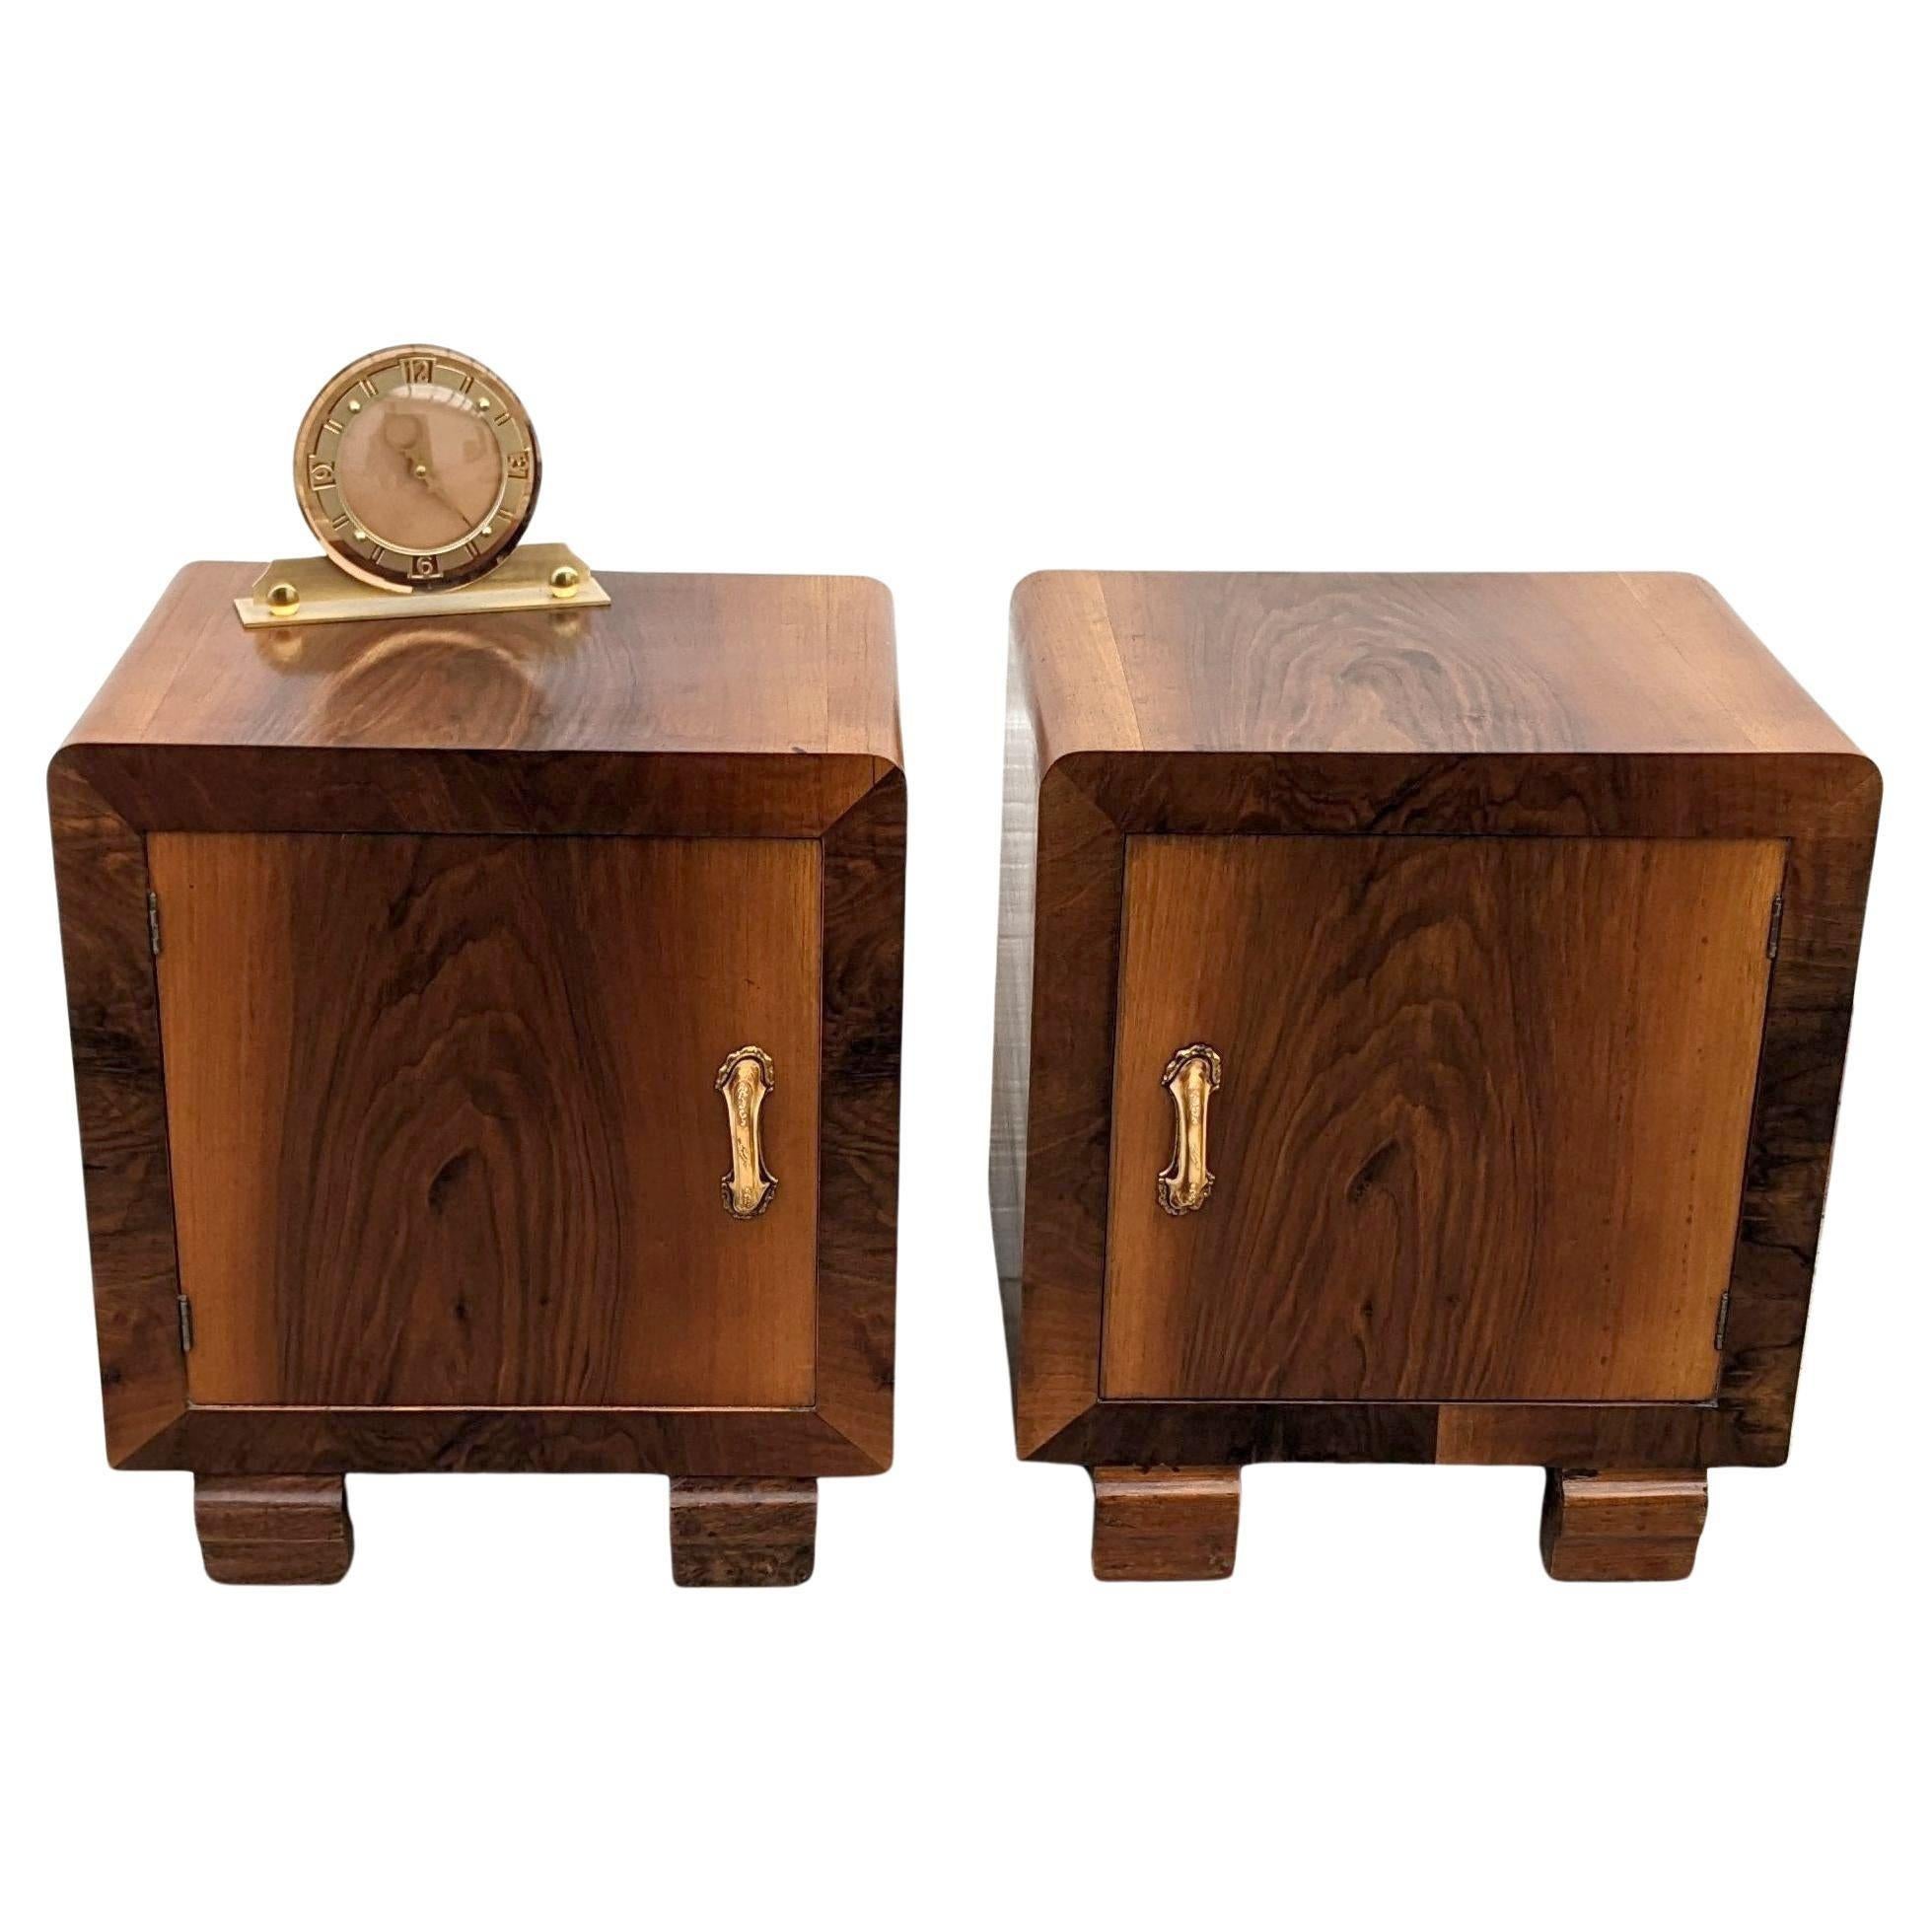 Art Deco Modernist Pair Matching of Italian Bedside Table Nightstands, c1930 In Good Condition For Sale In Devon, England